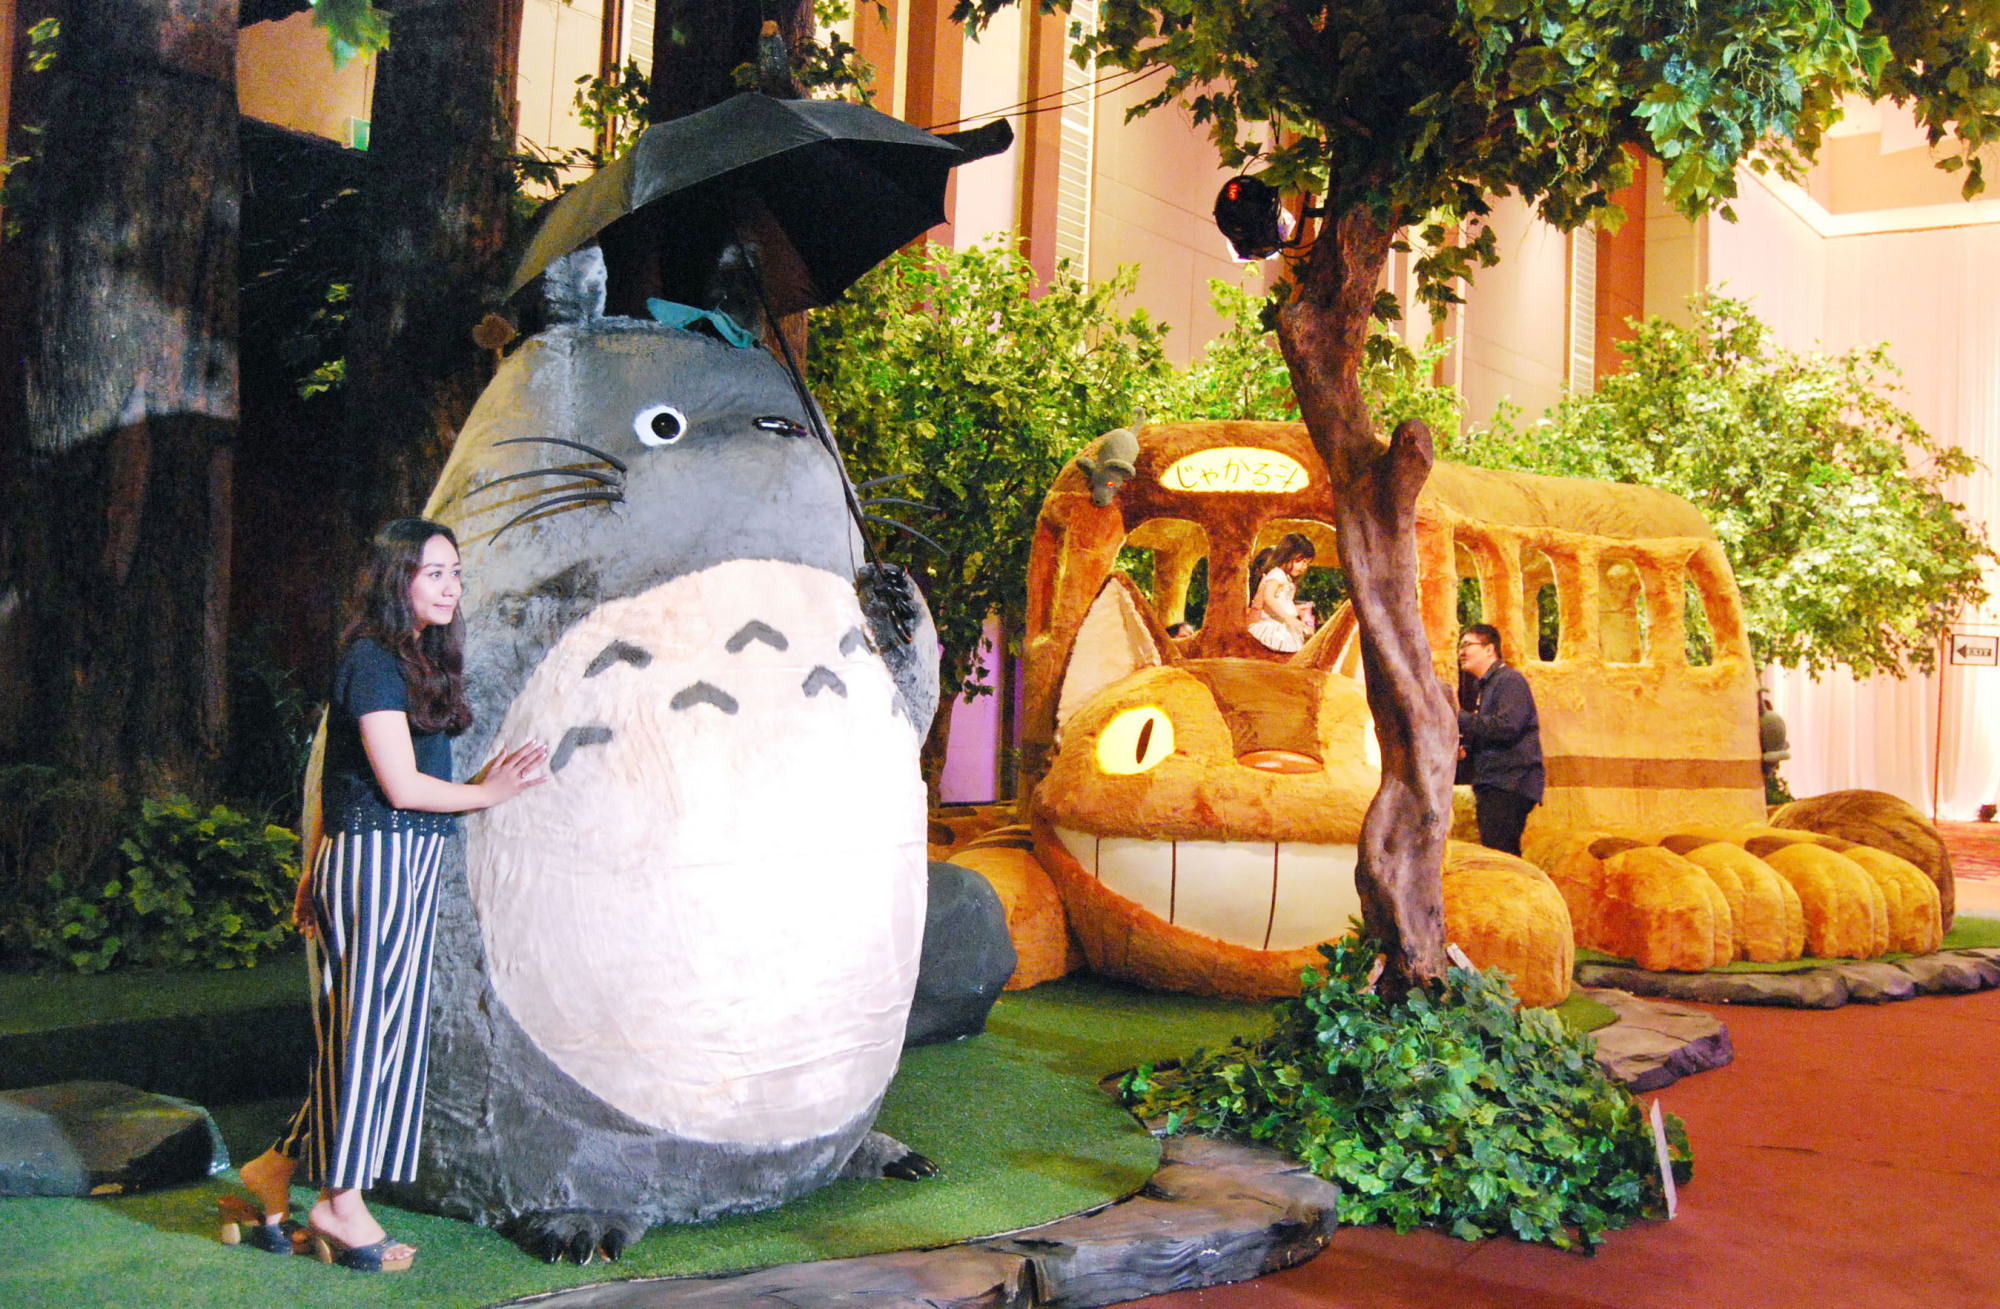 A visitor takes a photo with characters from the popular Japanese anime 'My Neighbor Totoro' in September in Jakarta. Netflix Inc. is now introducing more Japanese anime works to lure fans from outside Japan. | KYODO